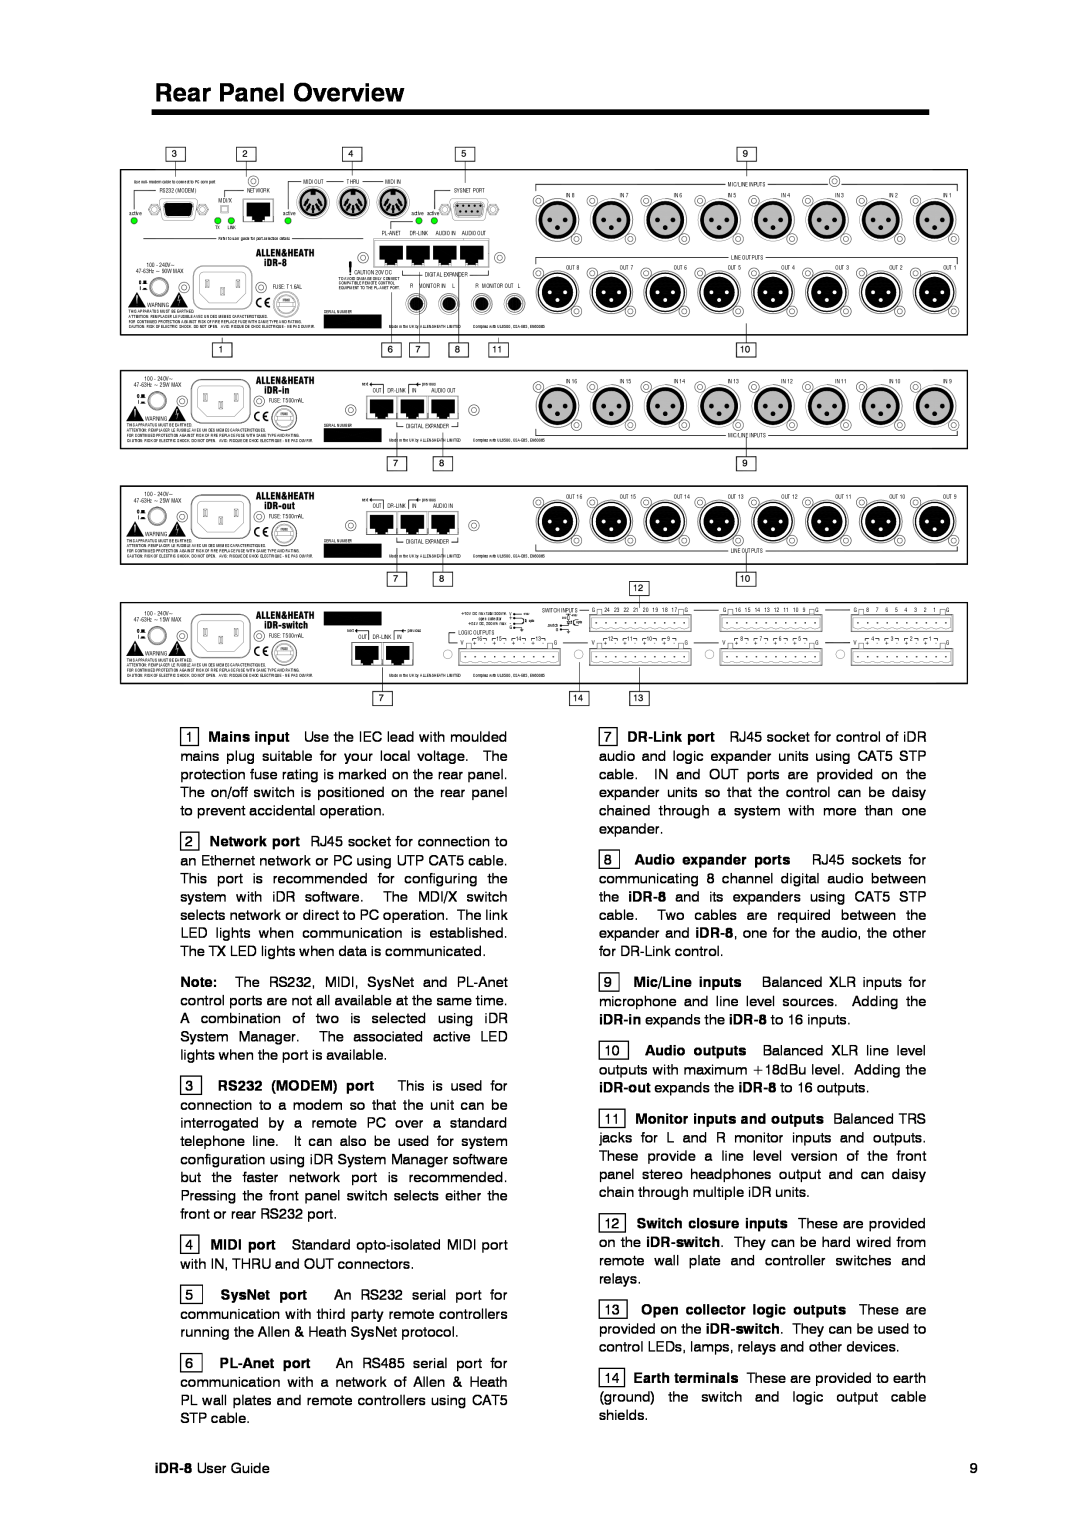 Compex Systems AP4530 manual Rear Panel Overview 